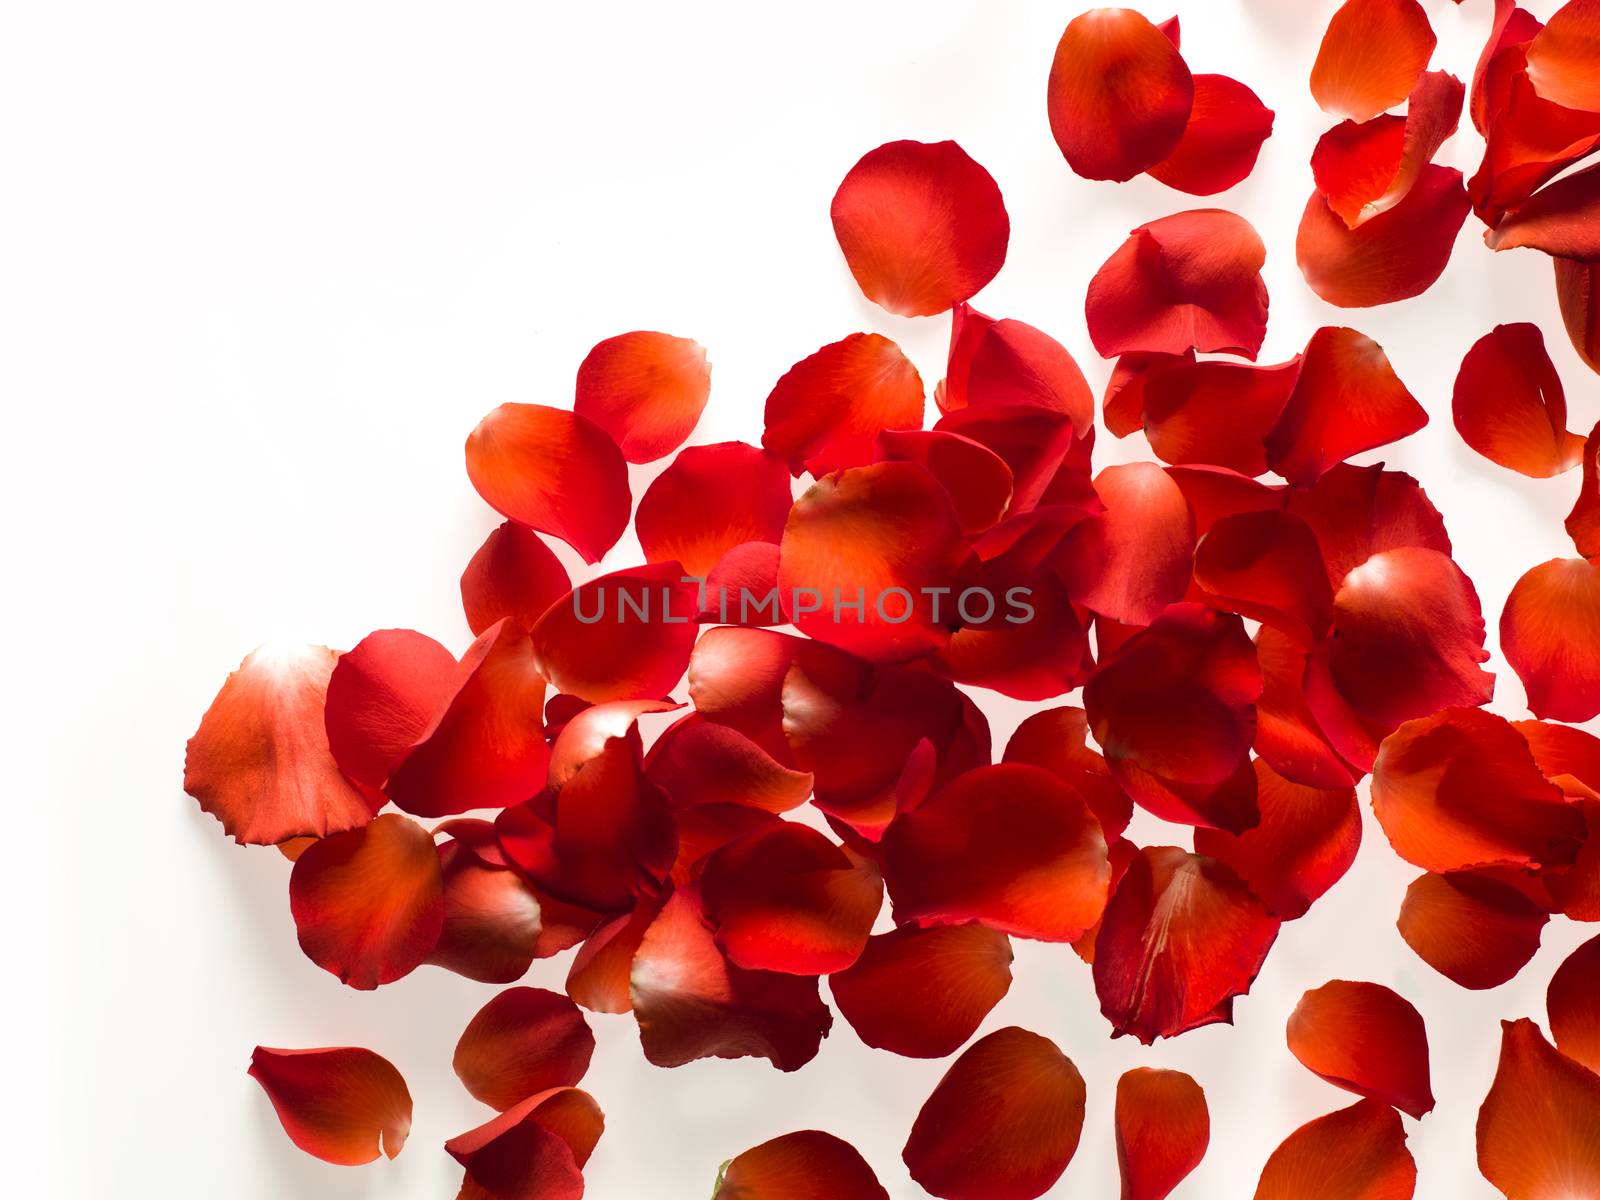 Random rose petals against white background. Great for presentations, forms and ad print